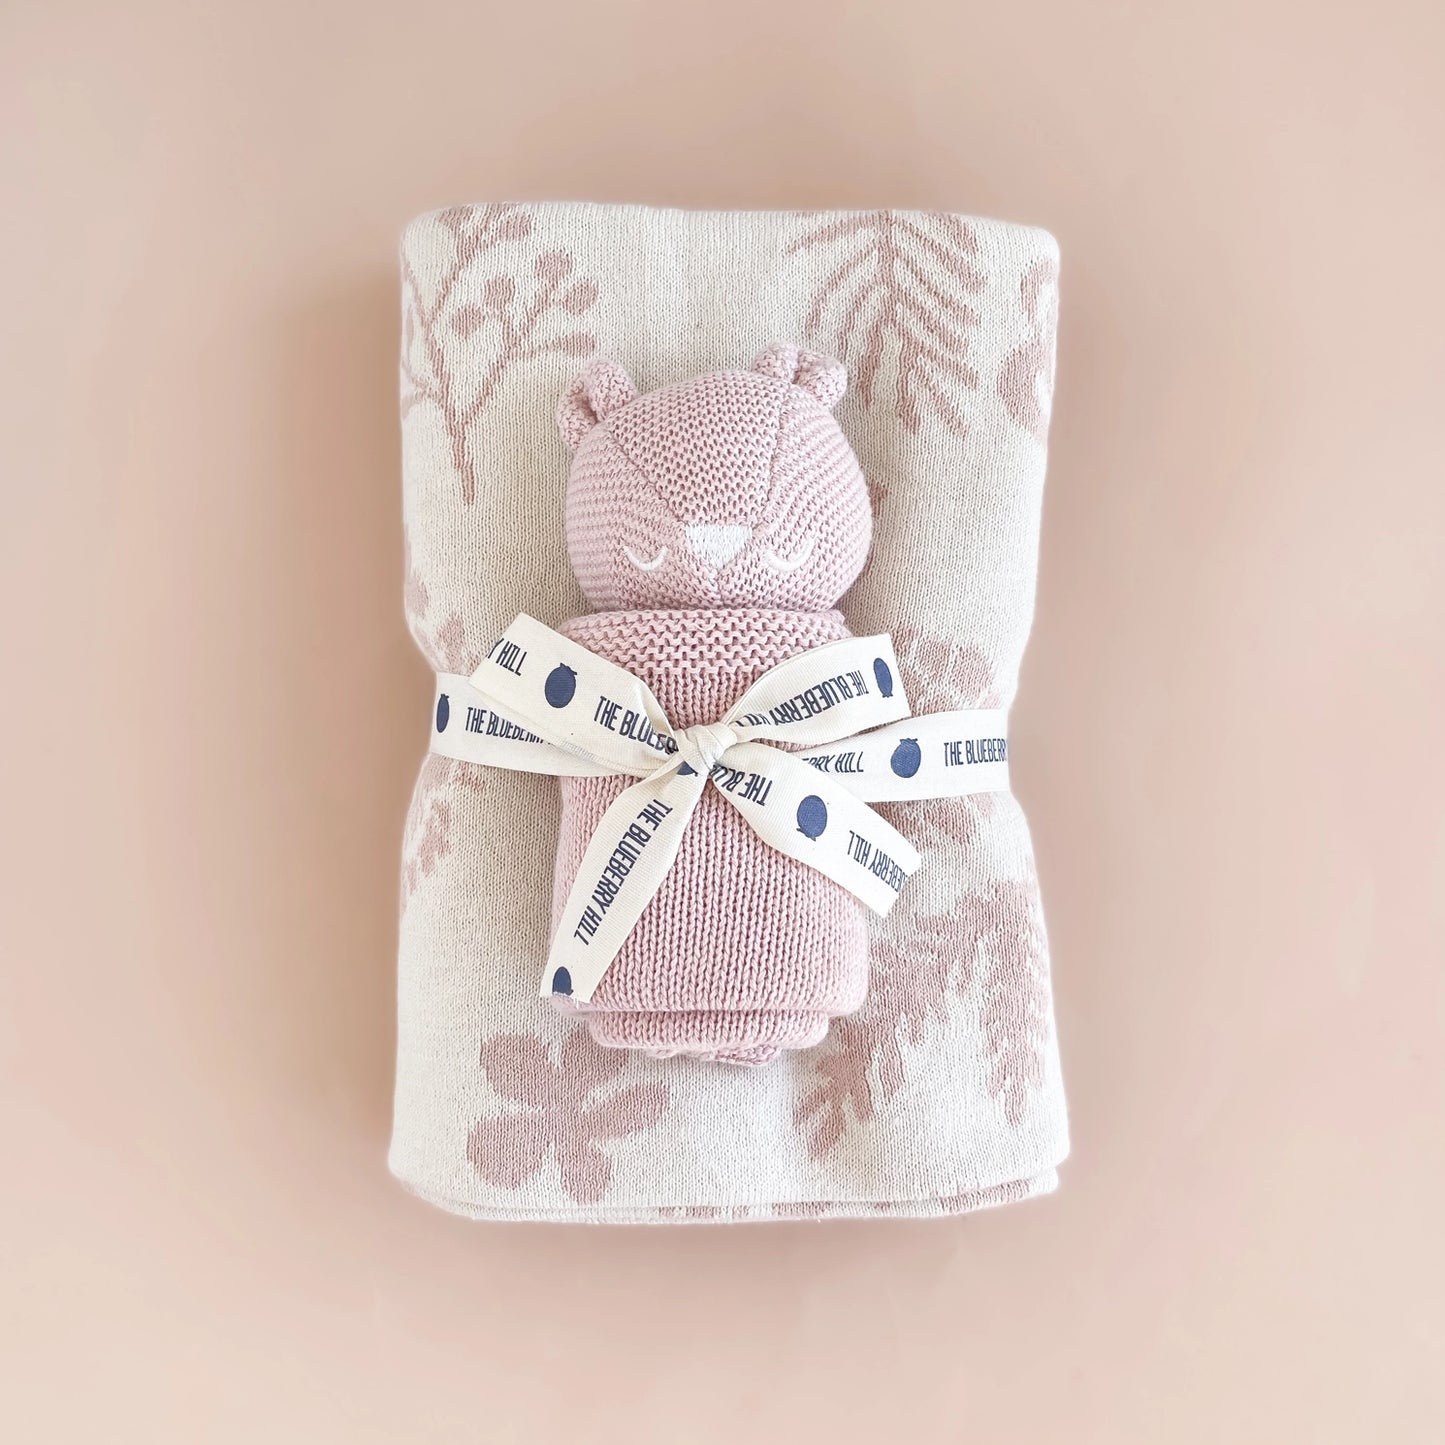 The Blueberry Hill baby gift set